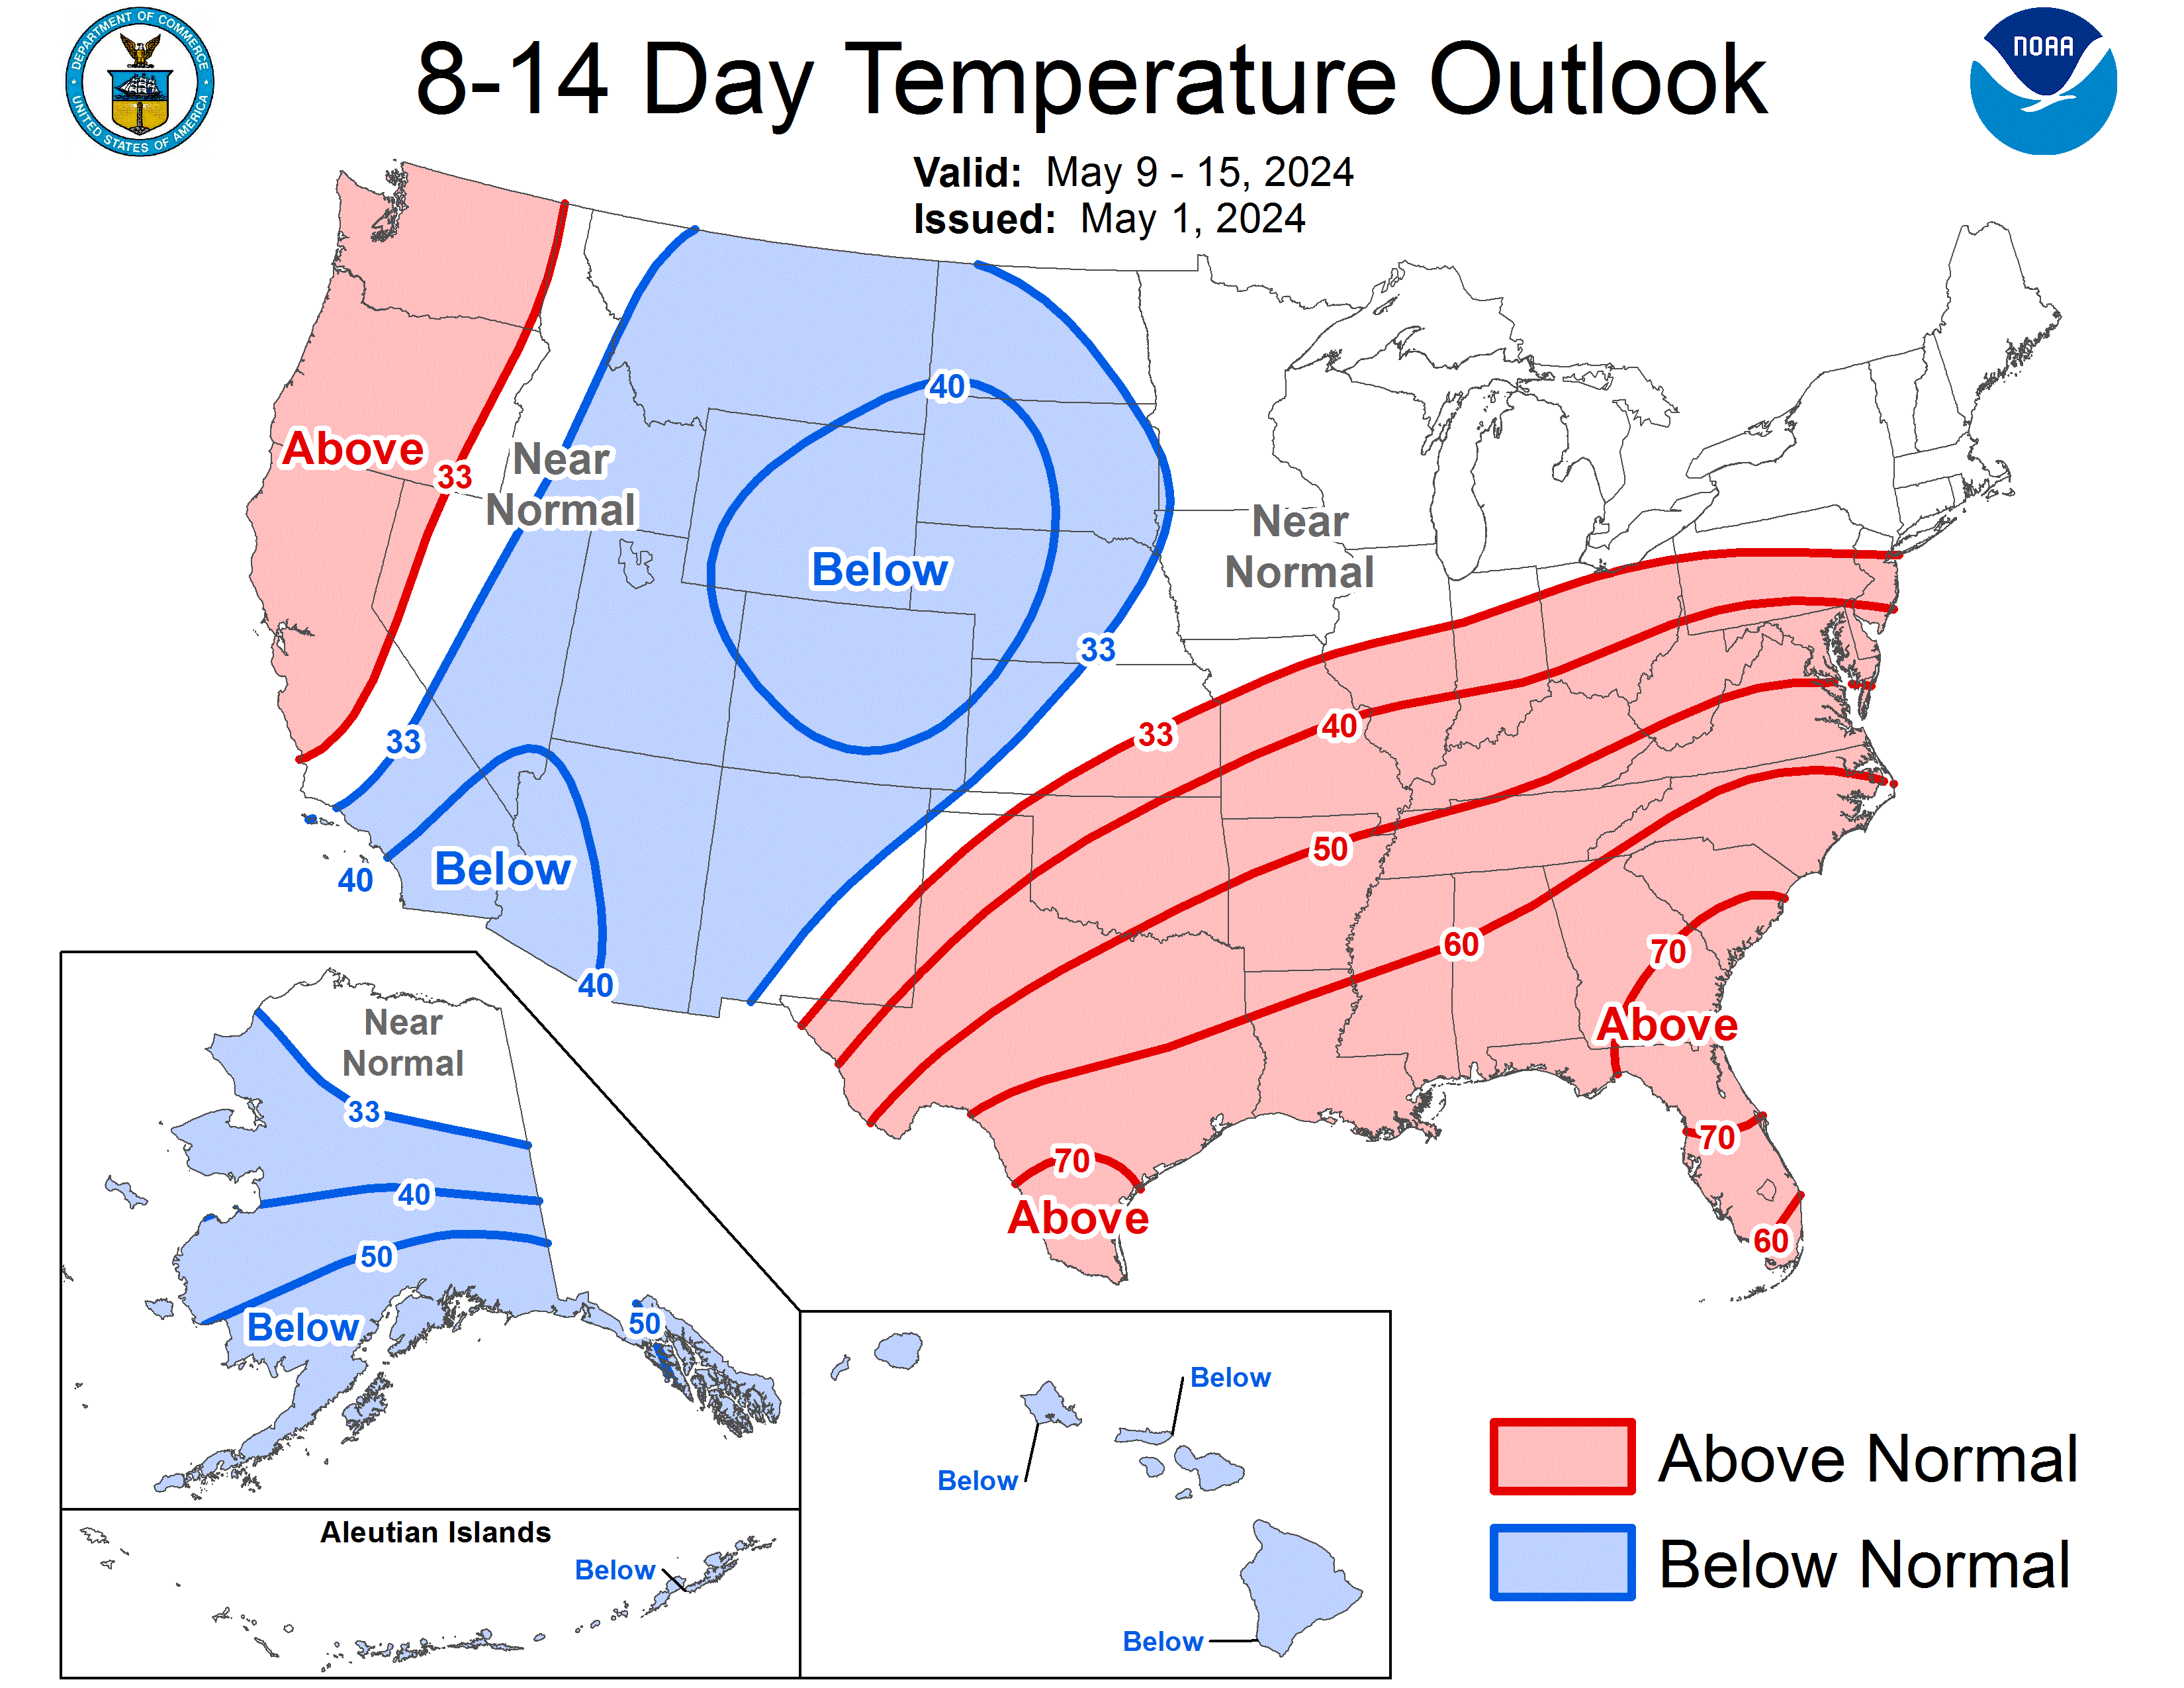 8 to 14 Day Outlook - Temperature Probability